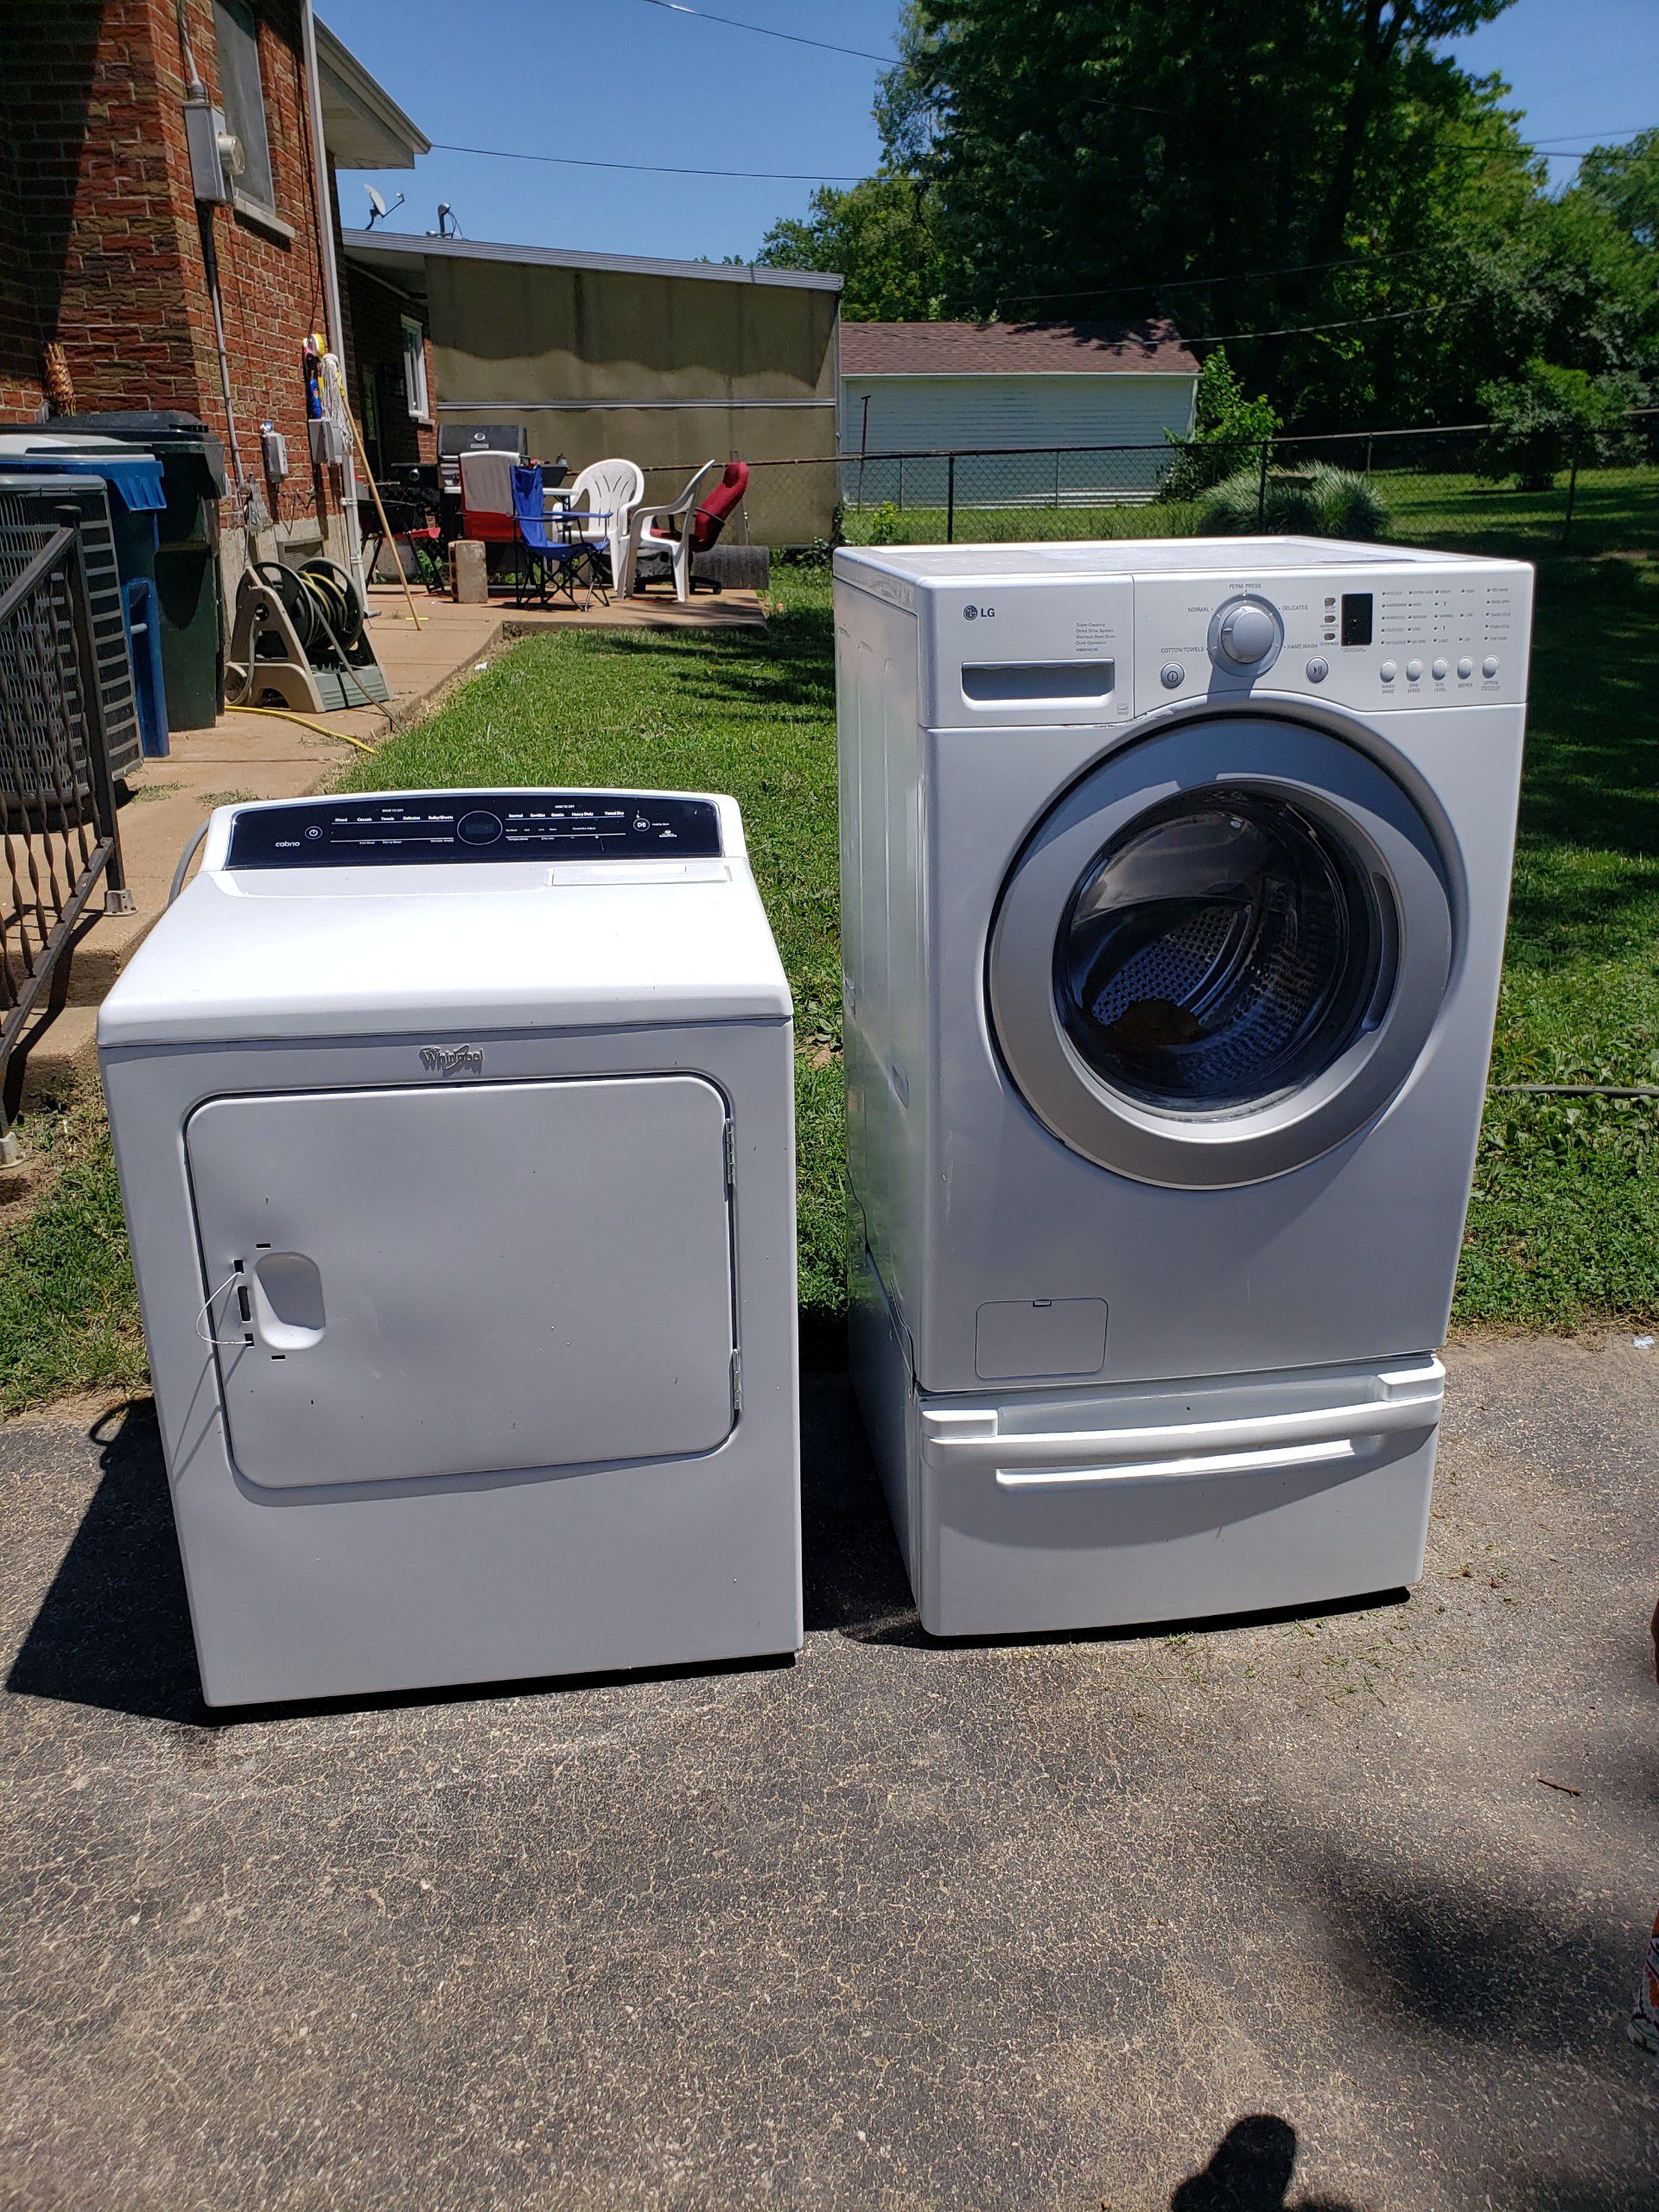 "LG" Washer and "Whirlpool" dryer combo